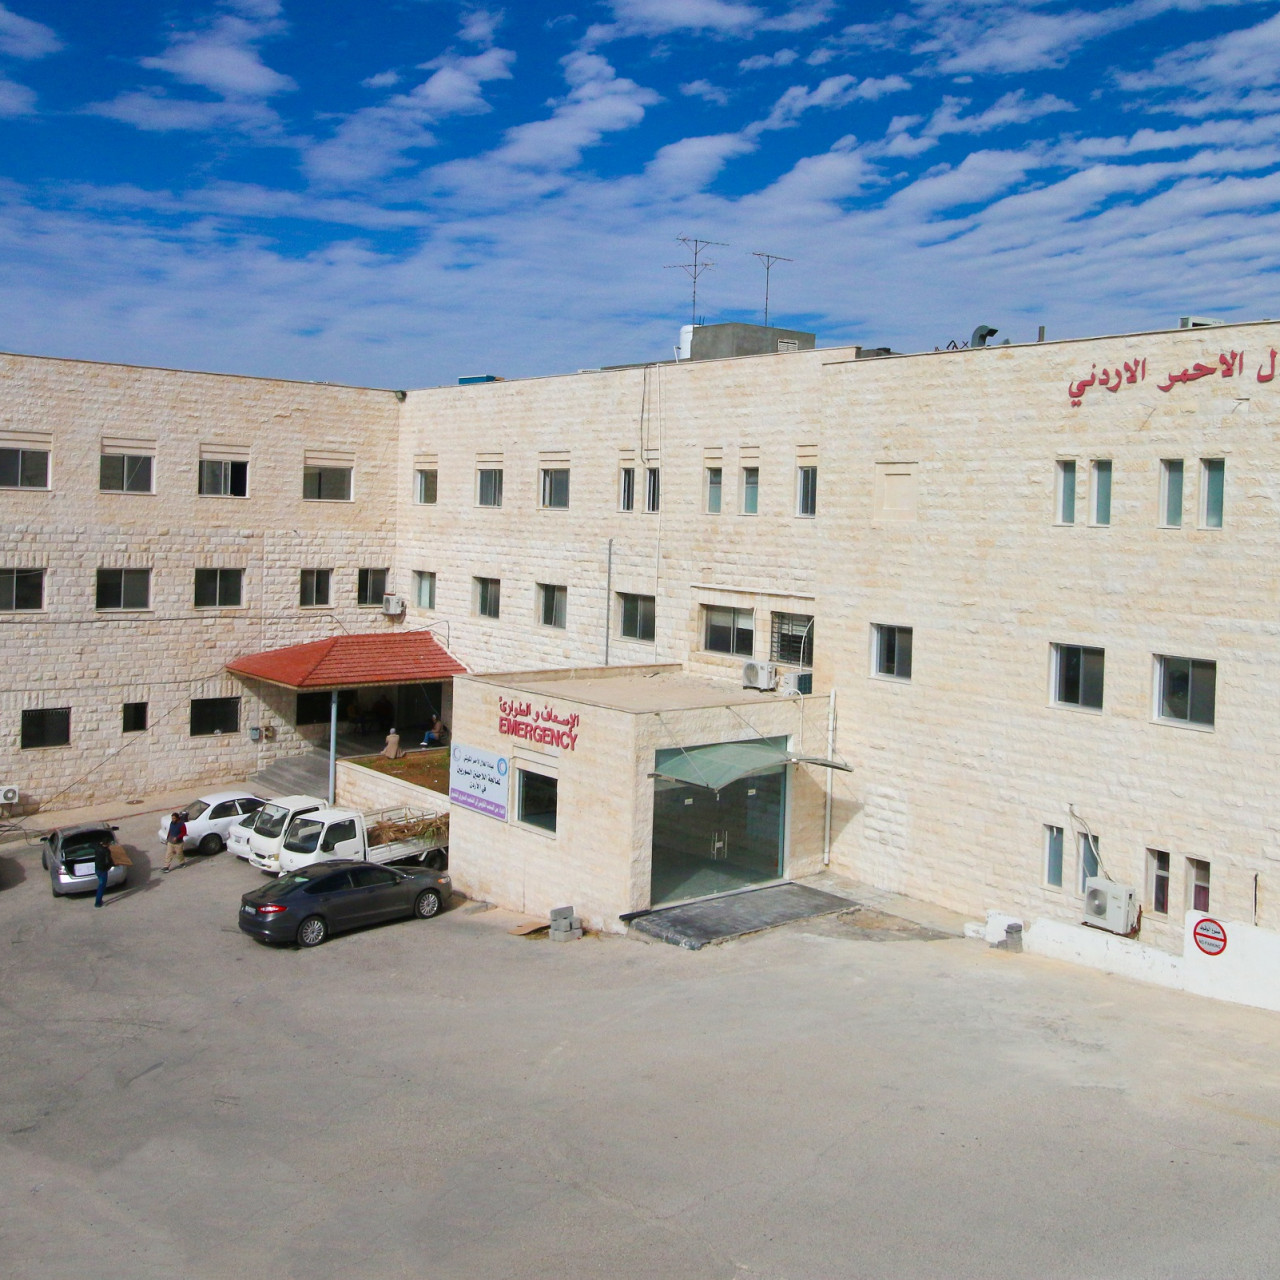 Jordan: newly-opened JRCS hospital will care for everyone including  COVID-19 patients | International Committee of the Red Cross